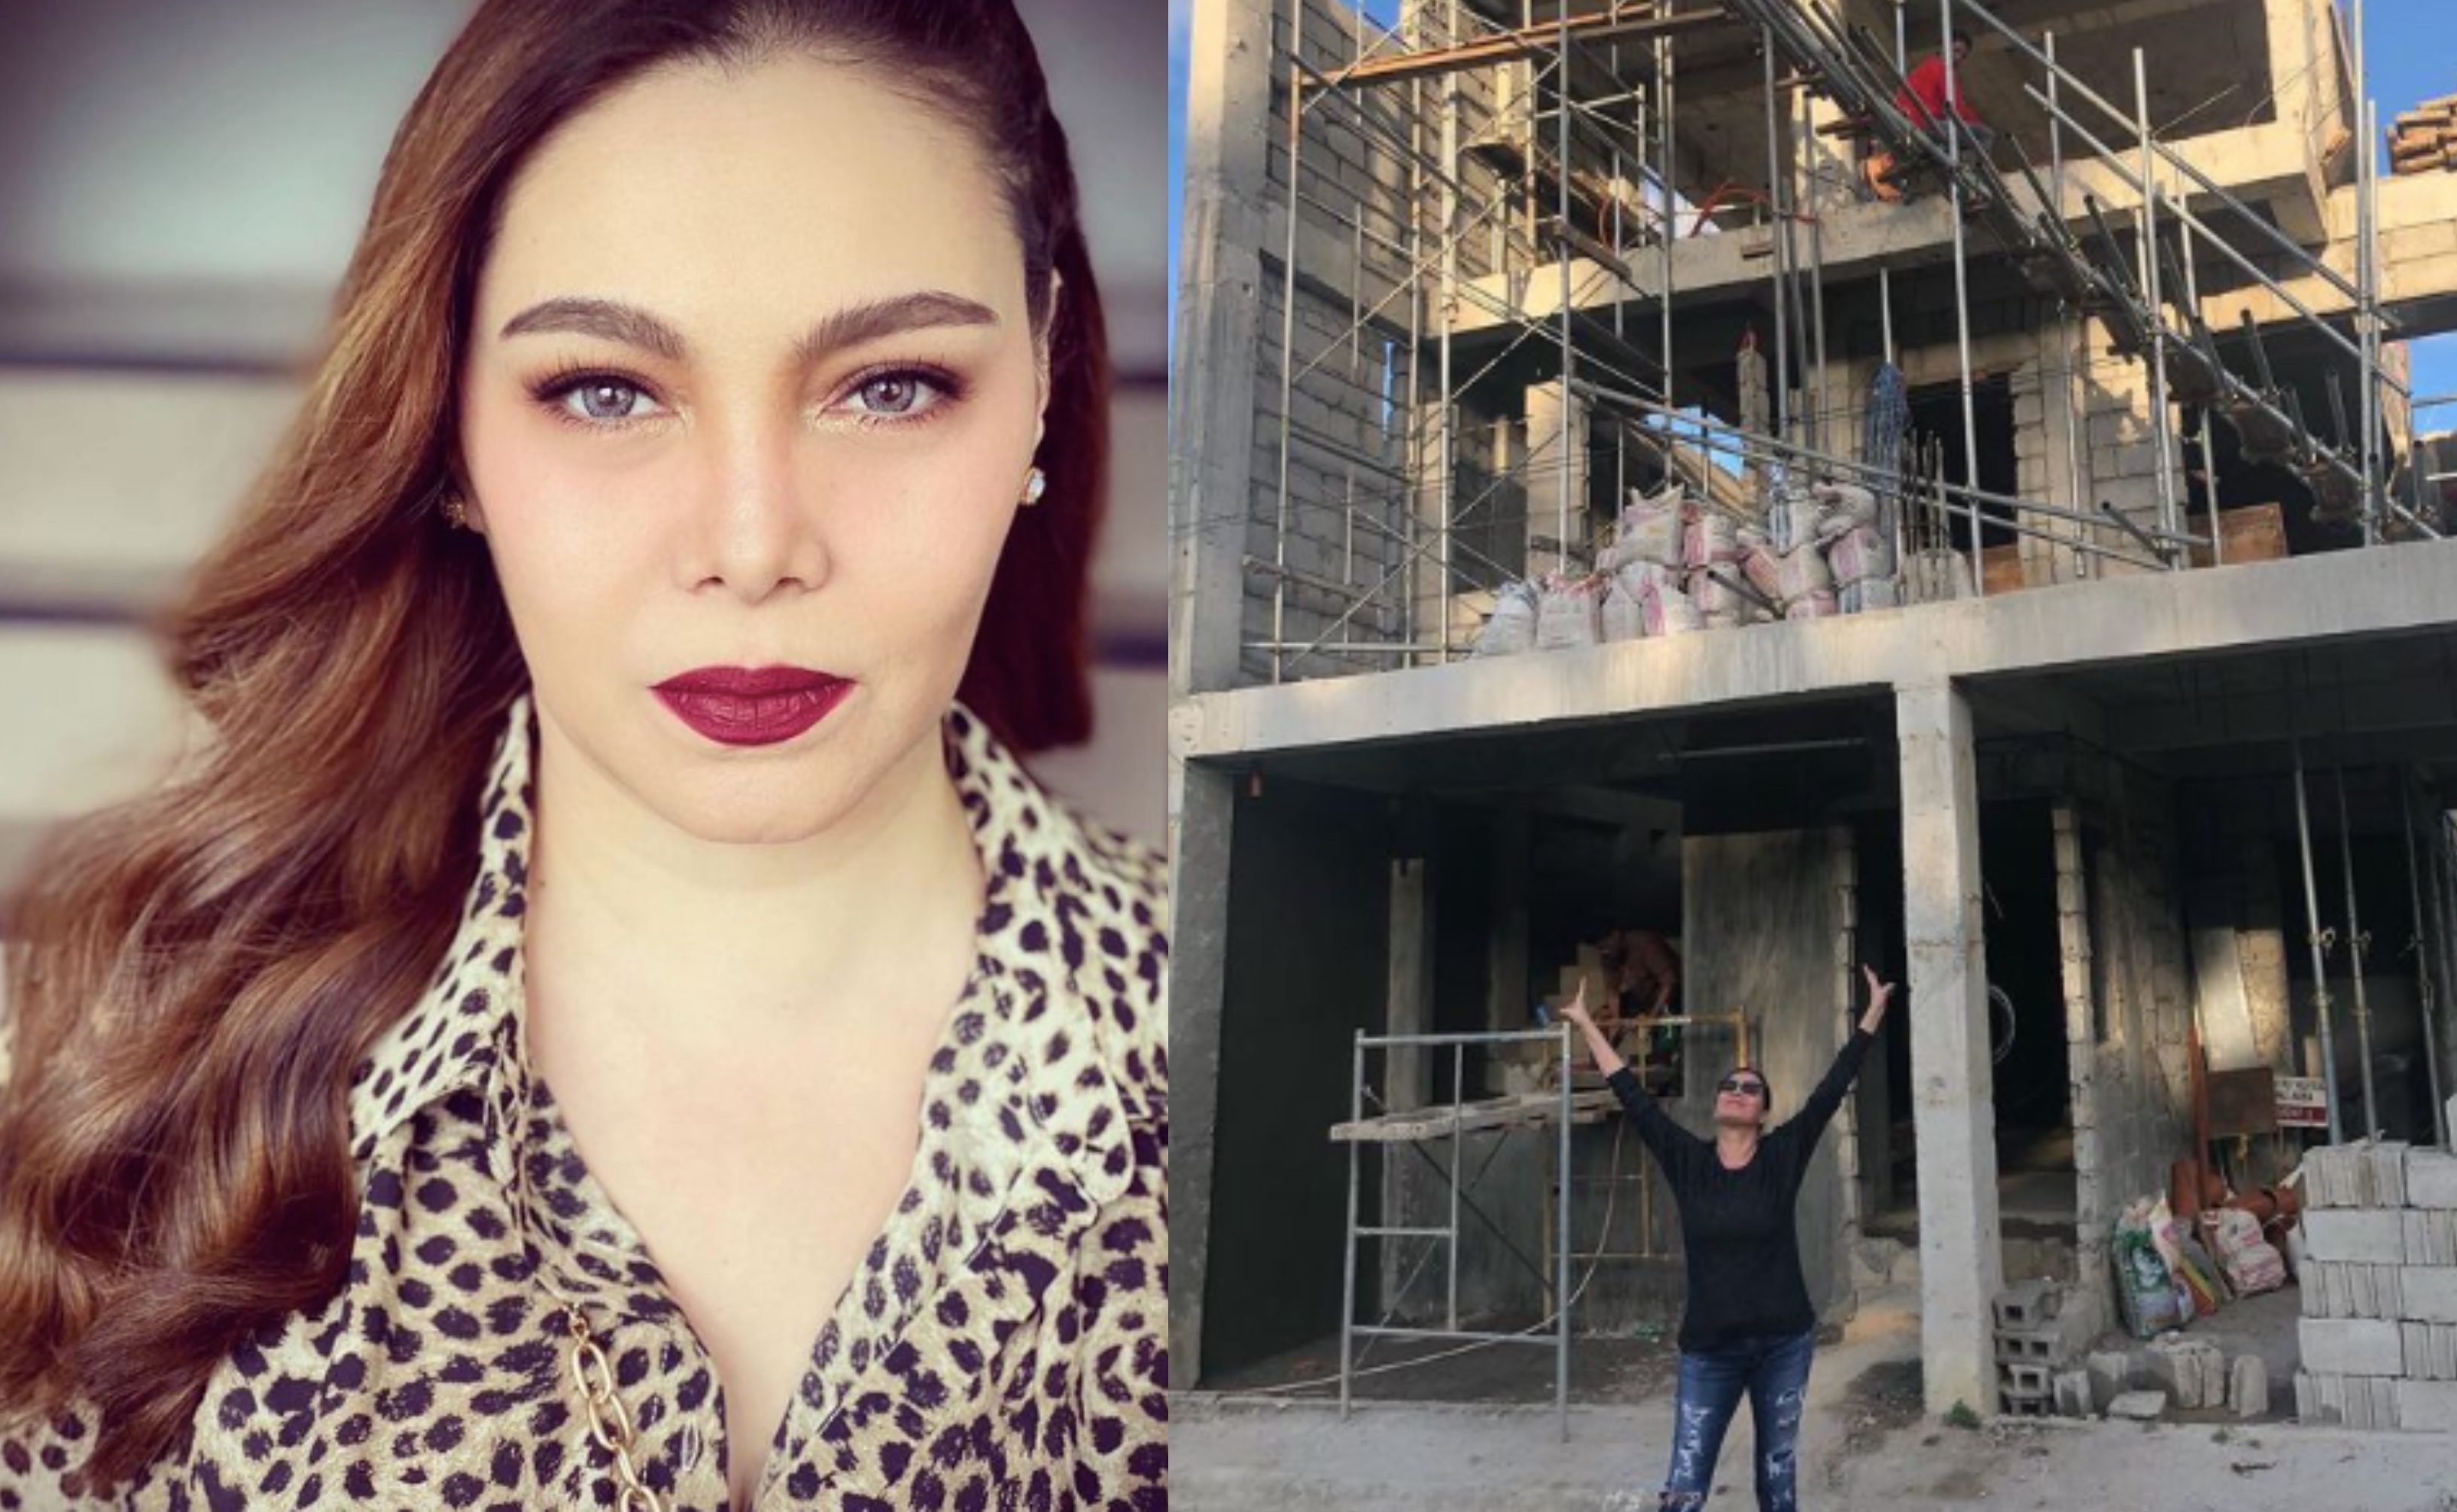 K Brosas files complaint against contractor who ‘abandoned’ her house